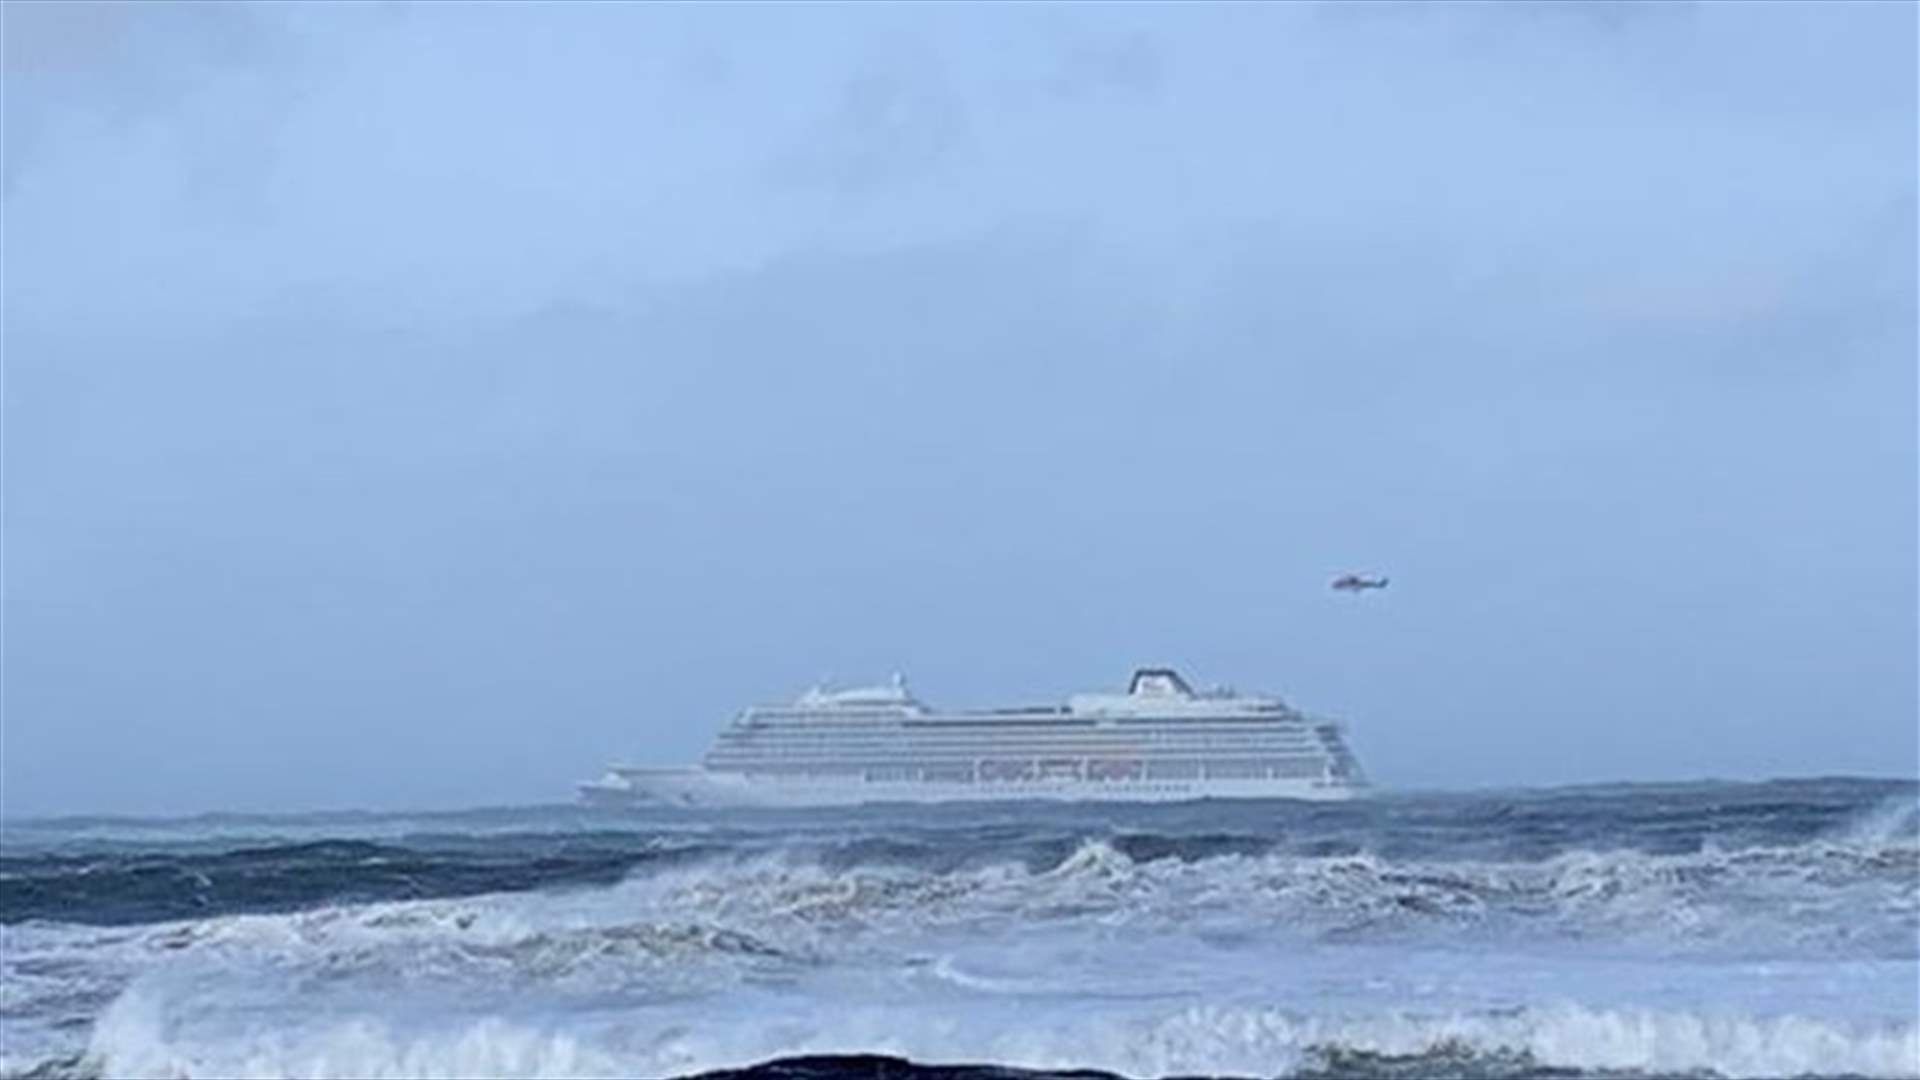 Almost 400 people winched from stricken cruise liner off Norway